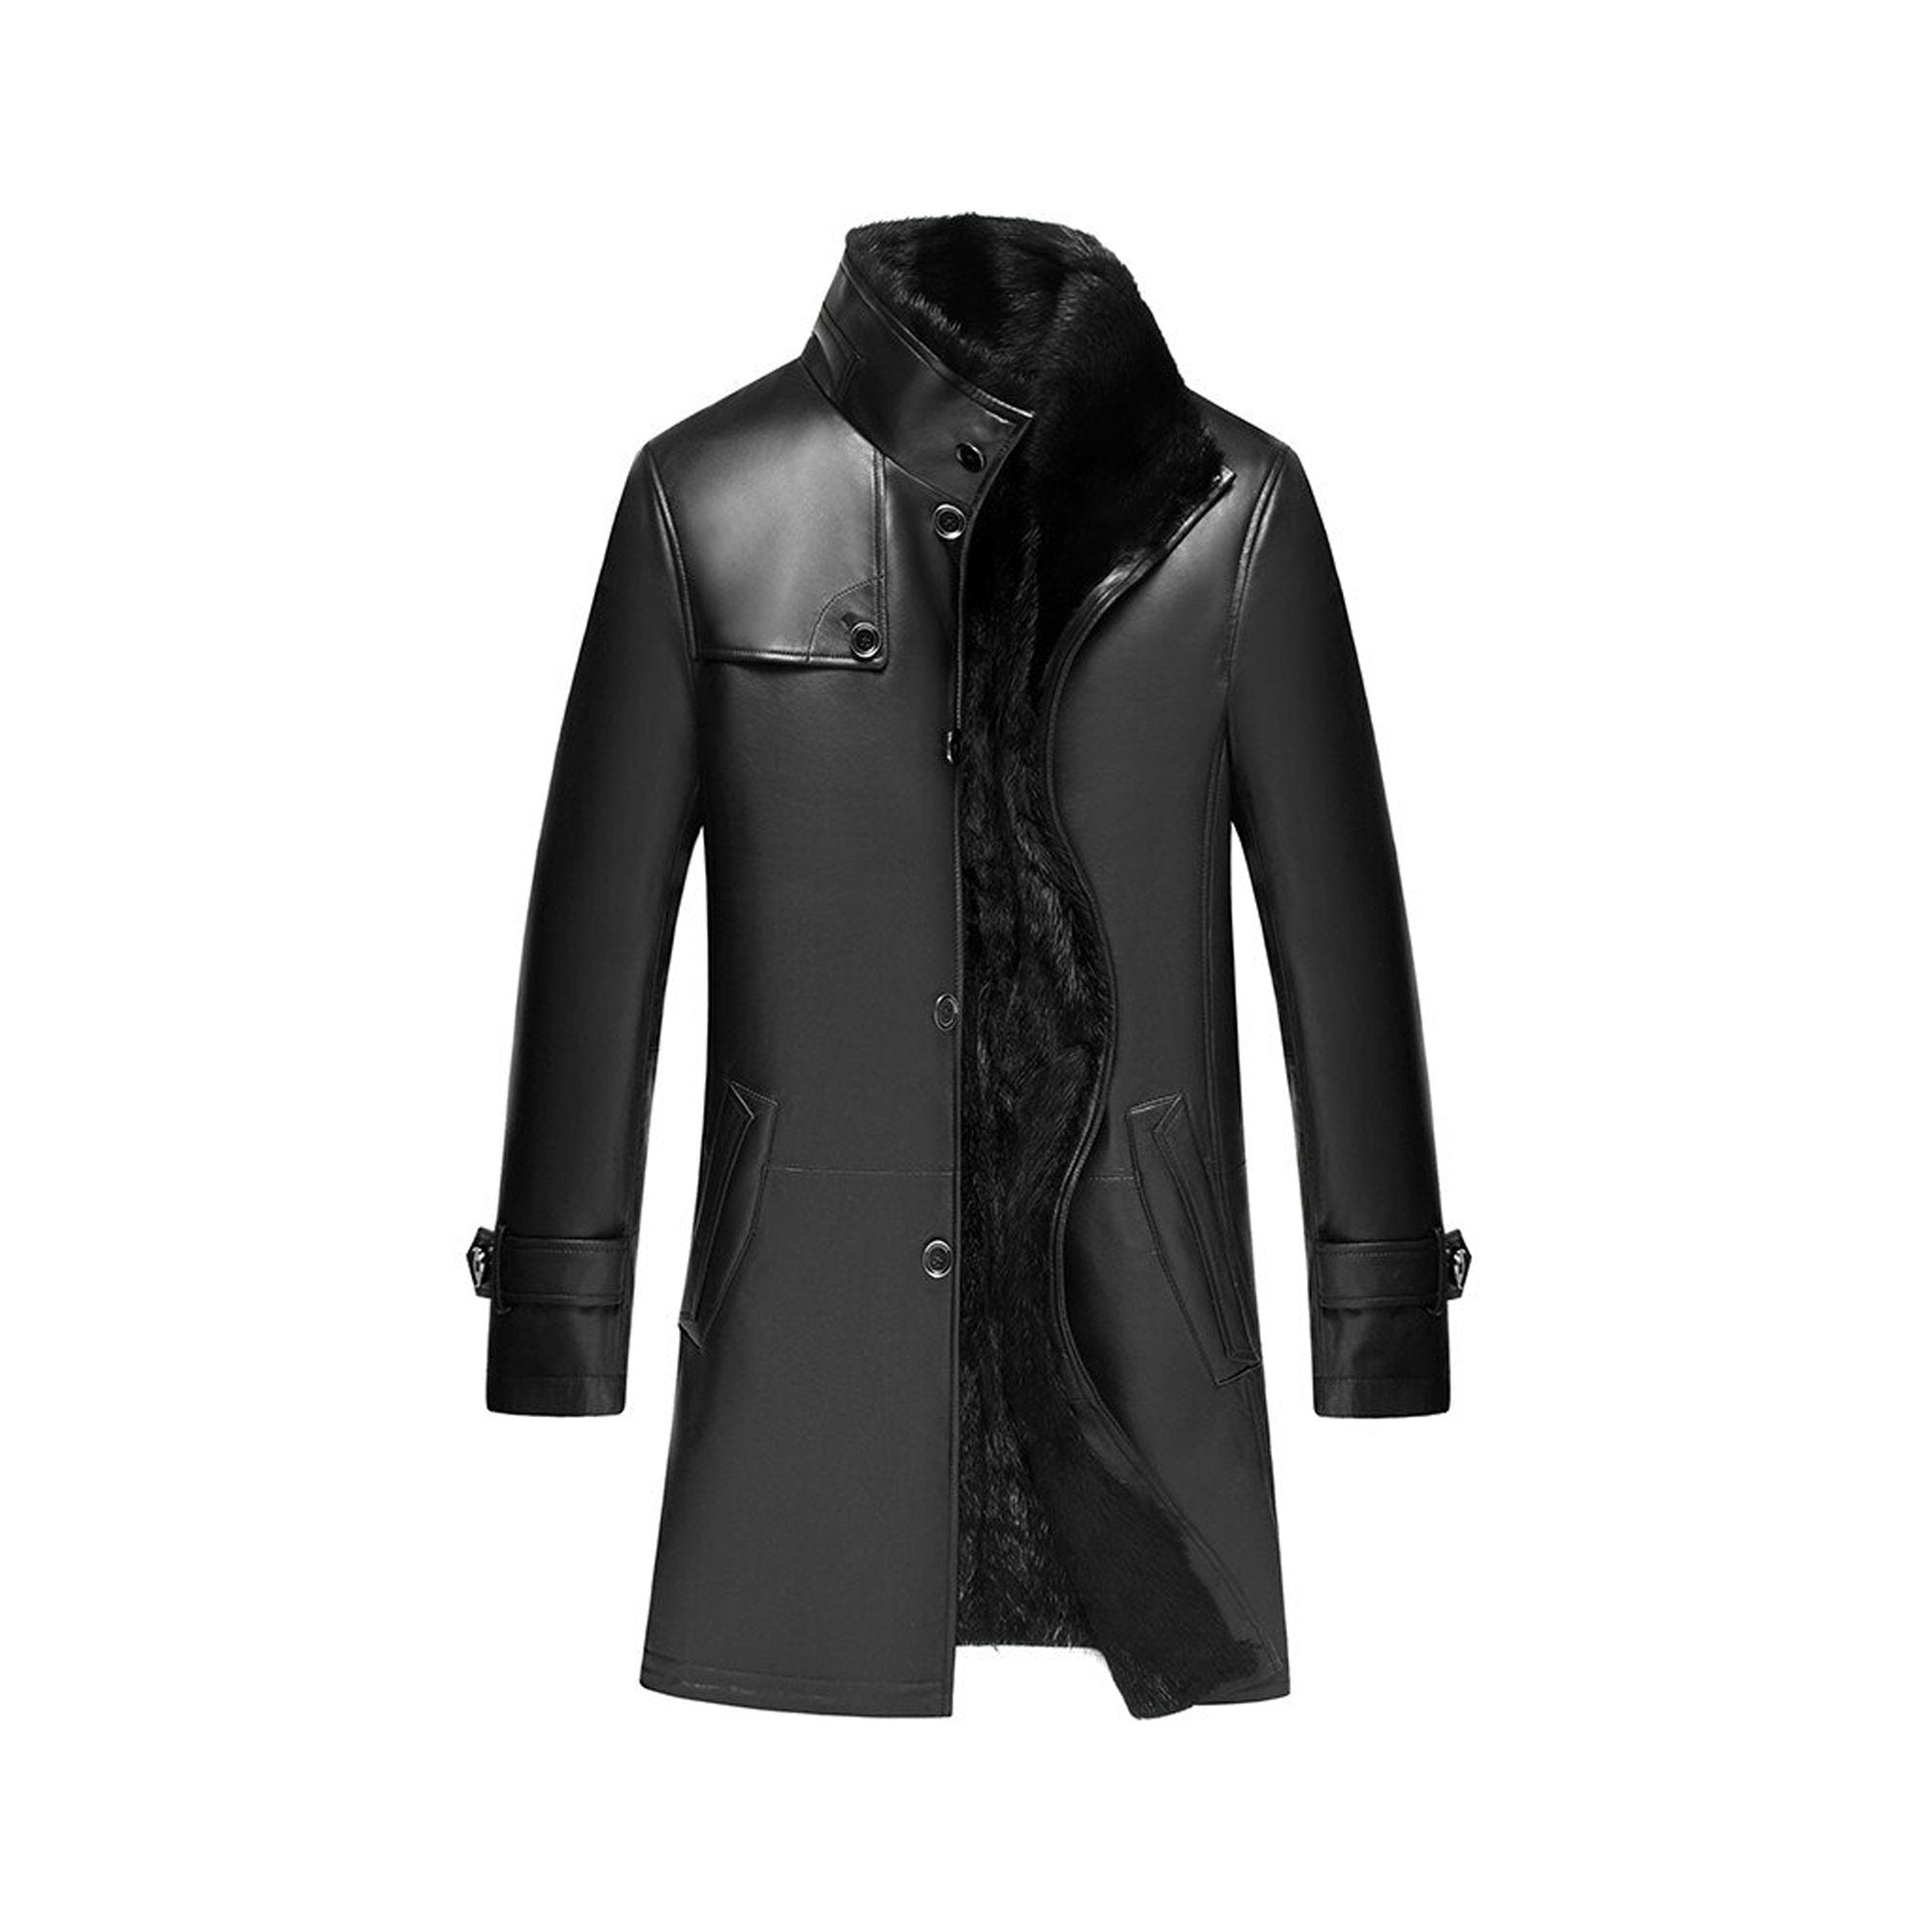 Stylish Trench Coats for Women Online at a la mode